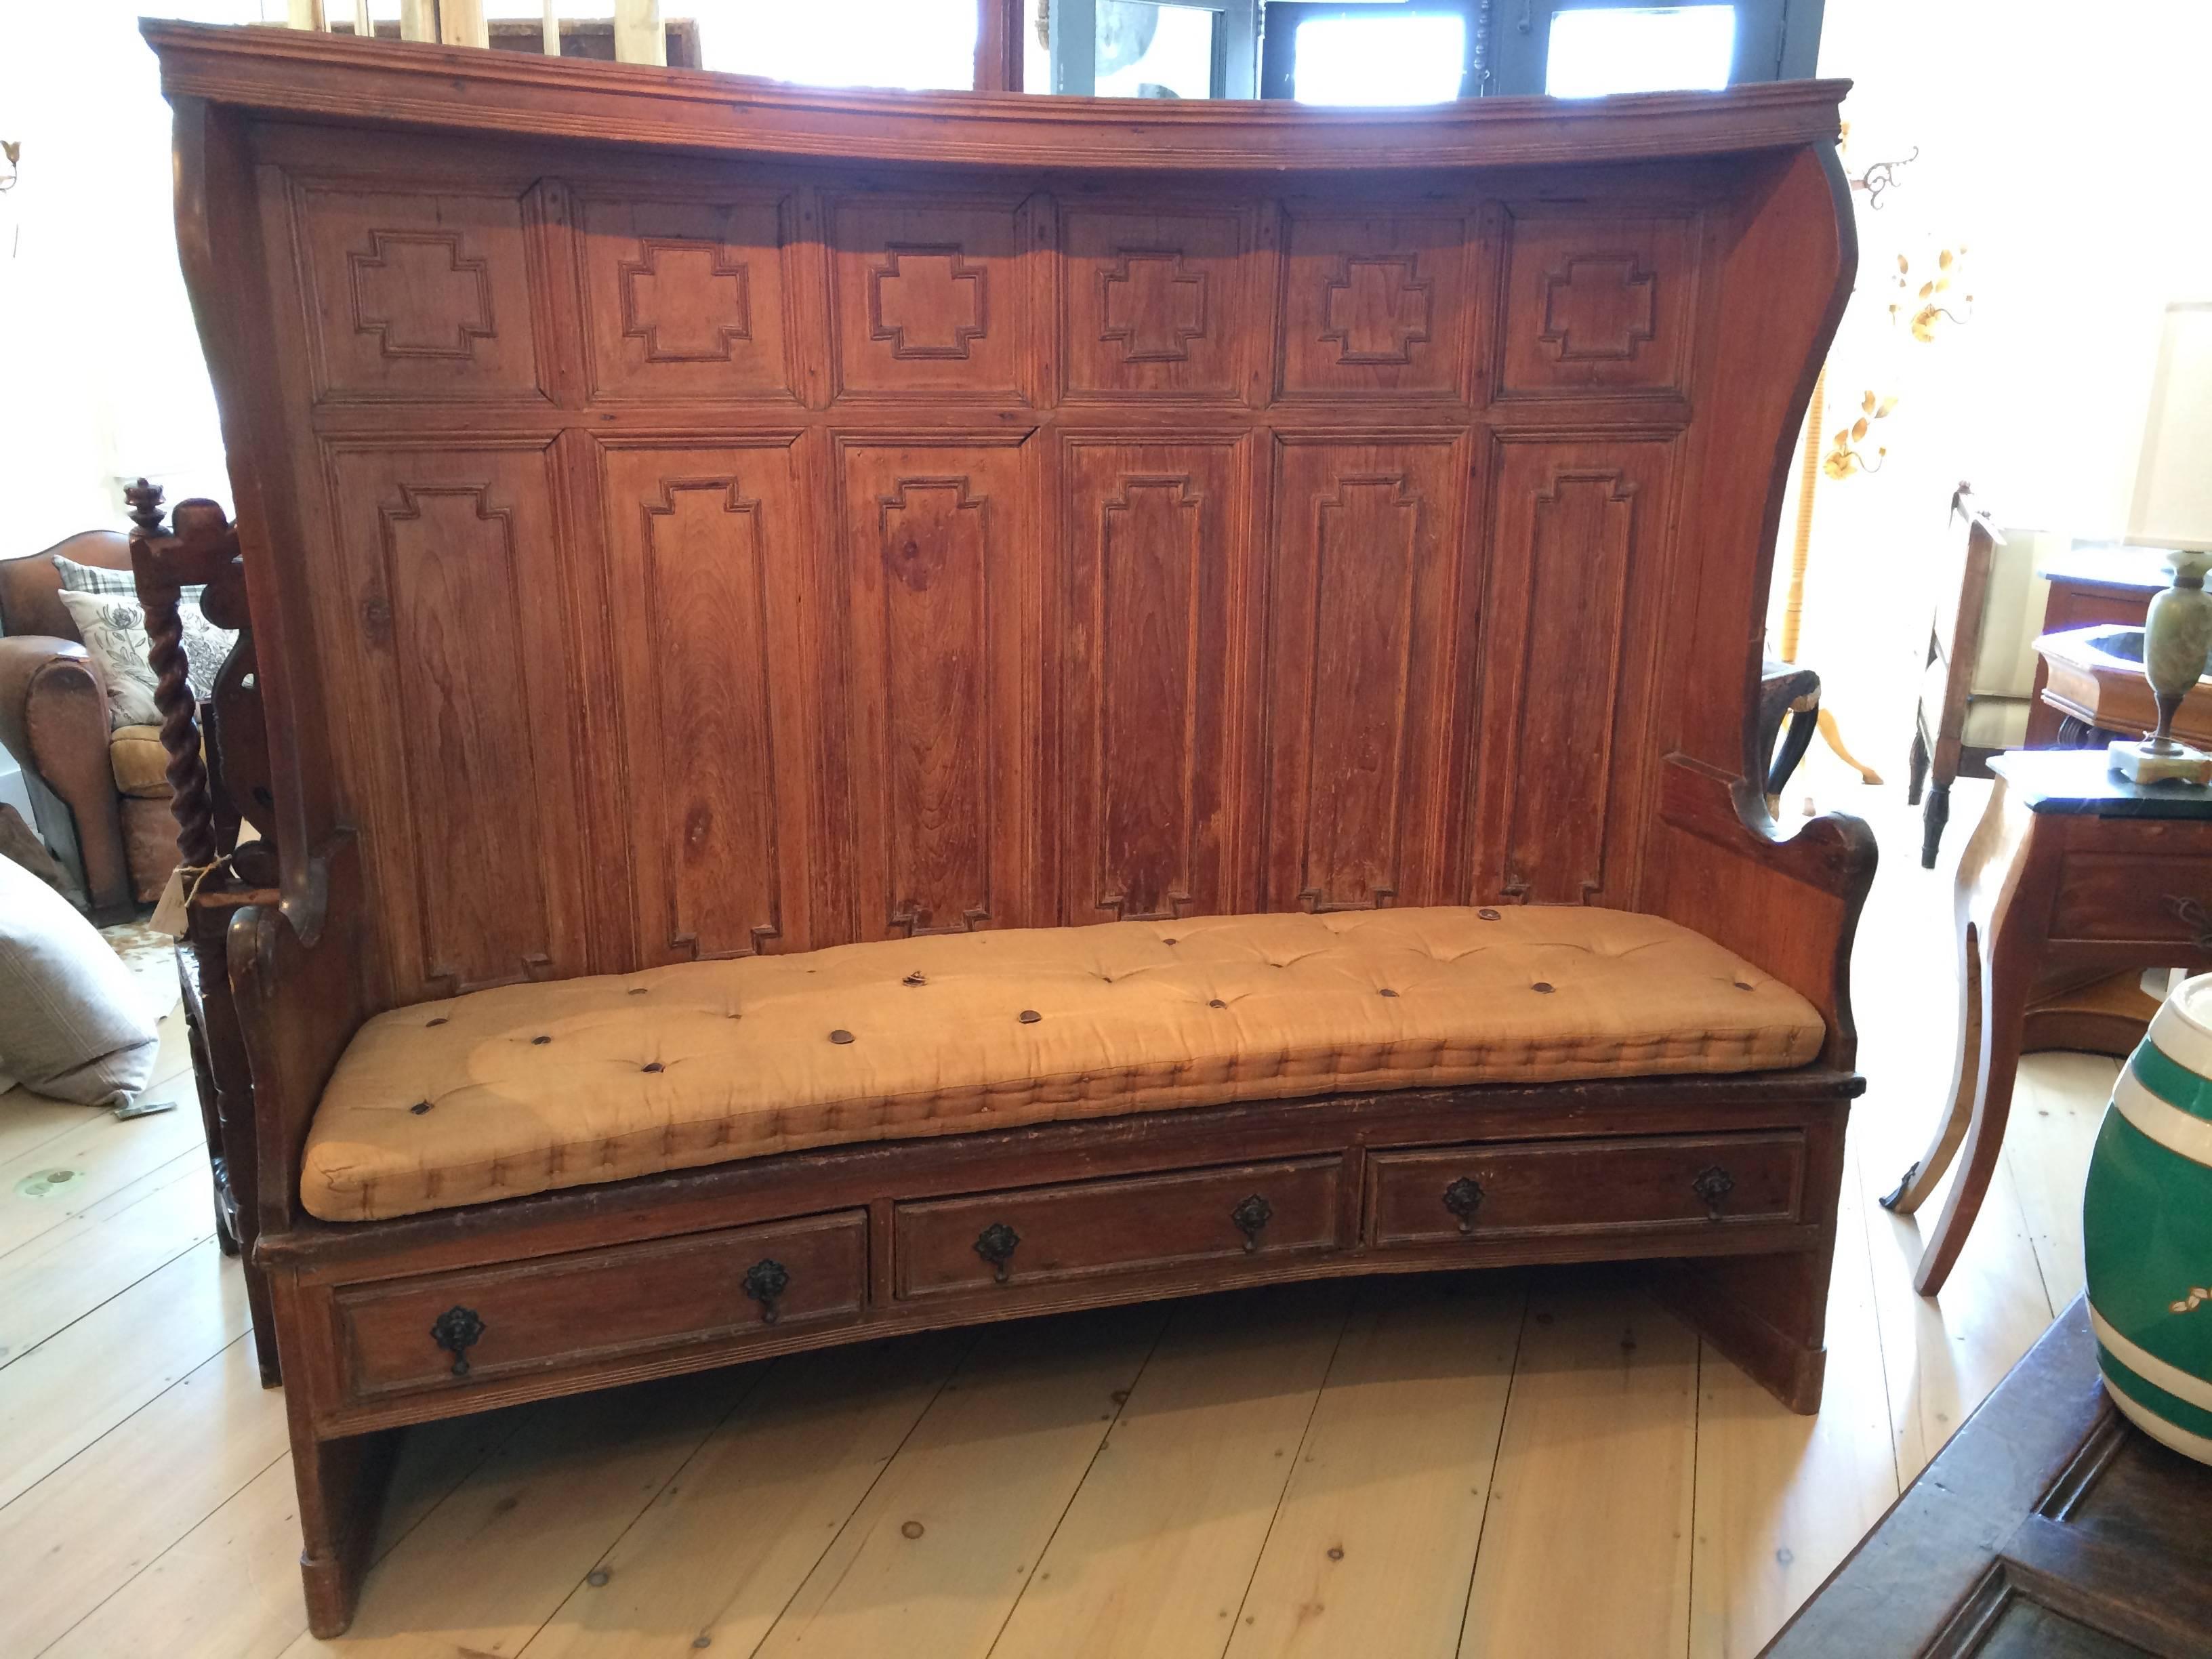 British Georgian Tavern settee with two-sided paneling and original leather-buttoned cushion. All-original, the tall back gently curves with the reverse fully paneled and the seat over drawers. Designed to protect the sitter from drafts, this can be